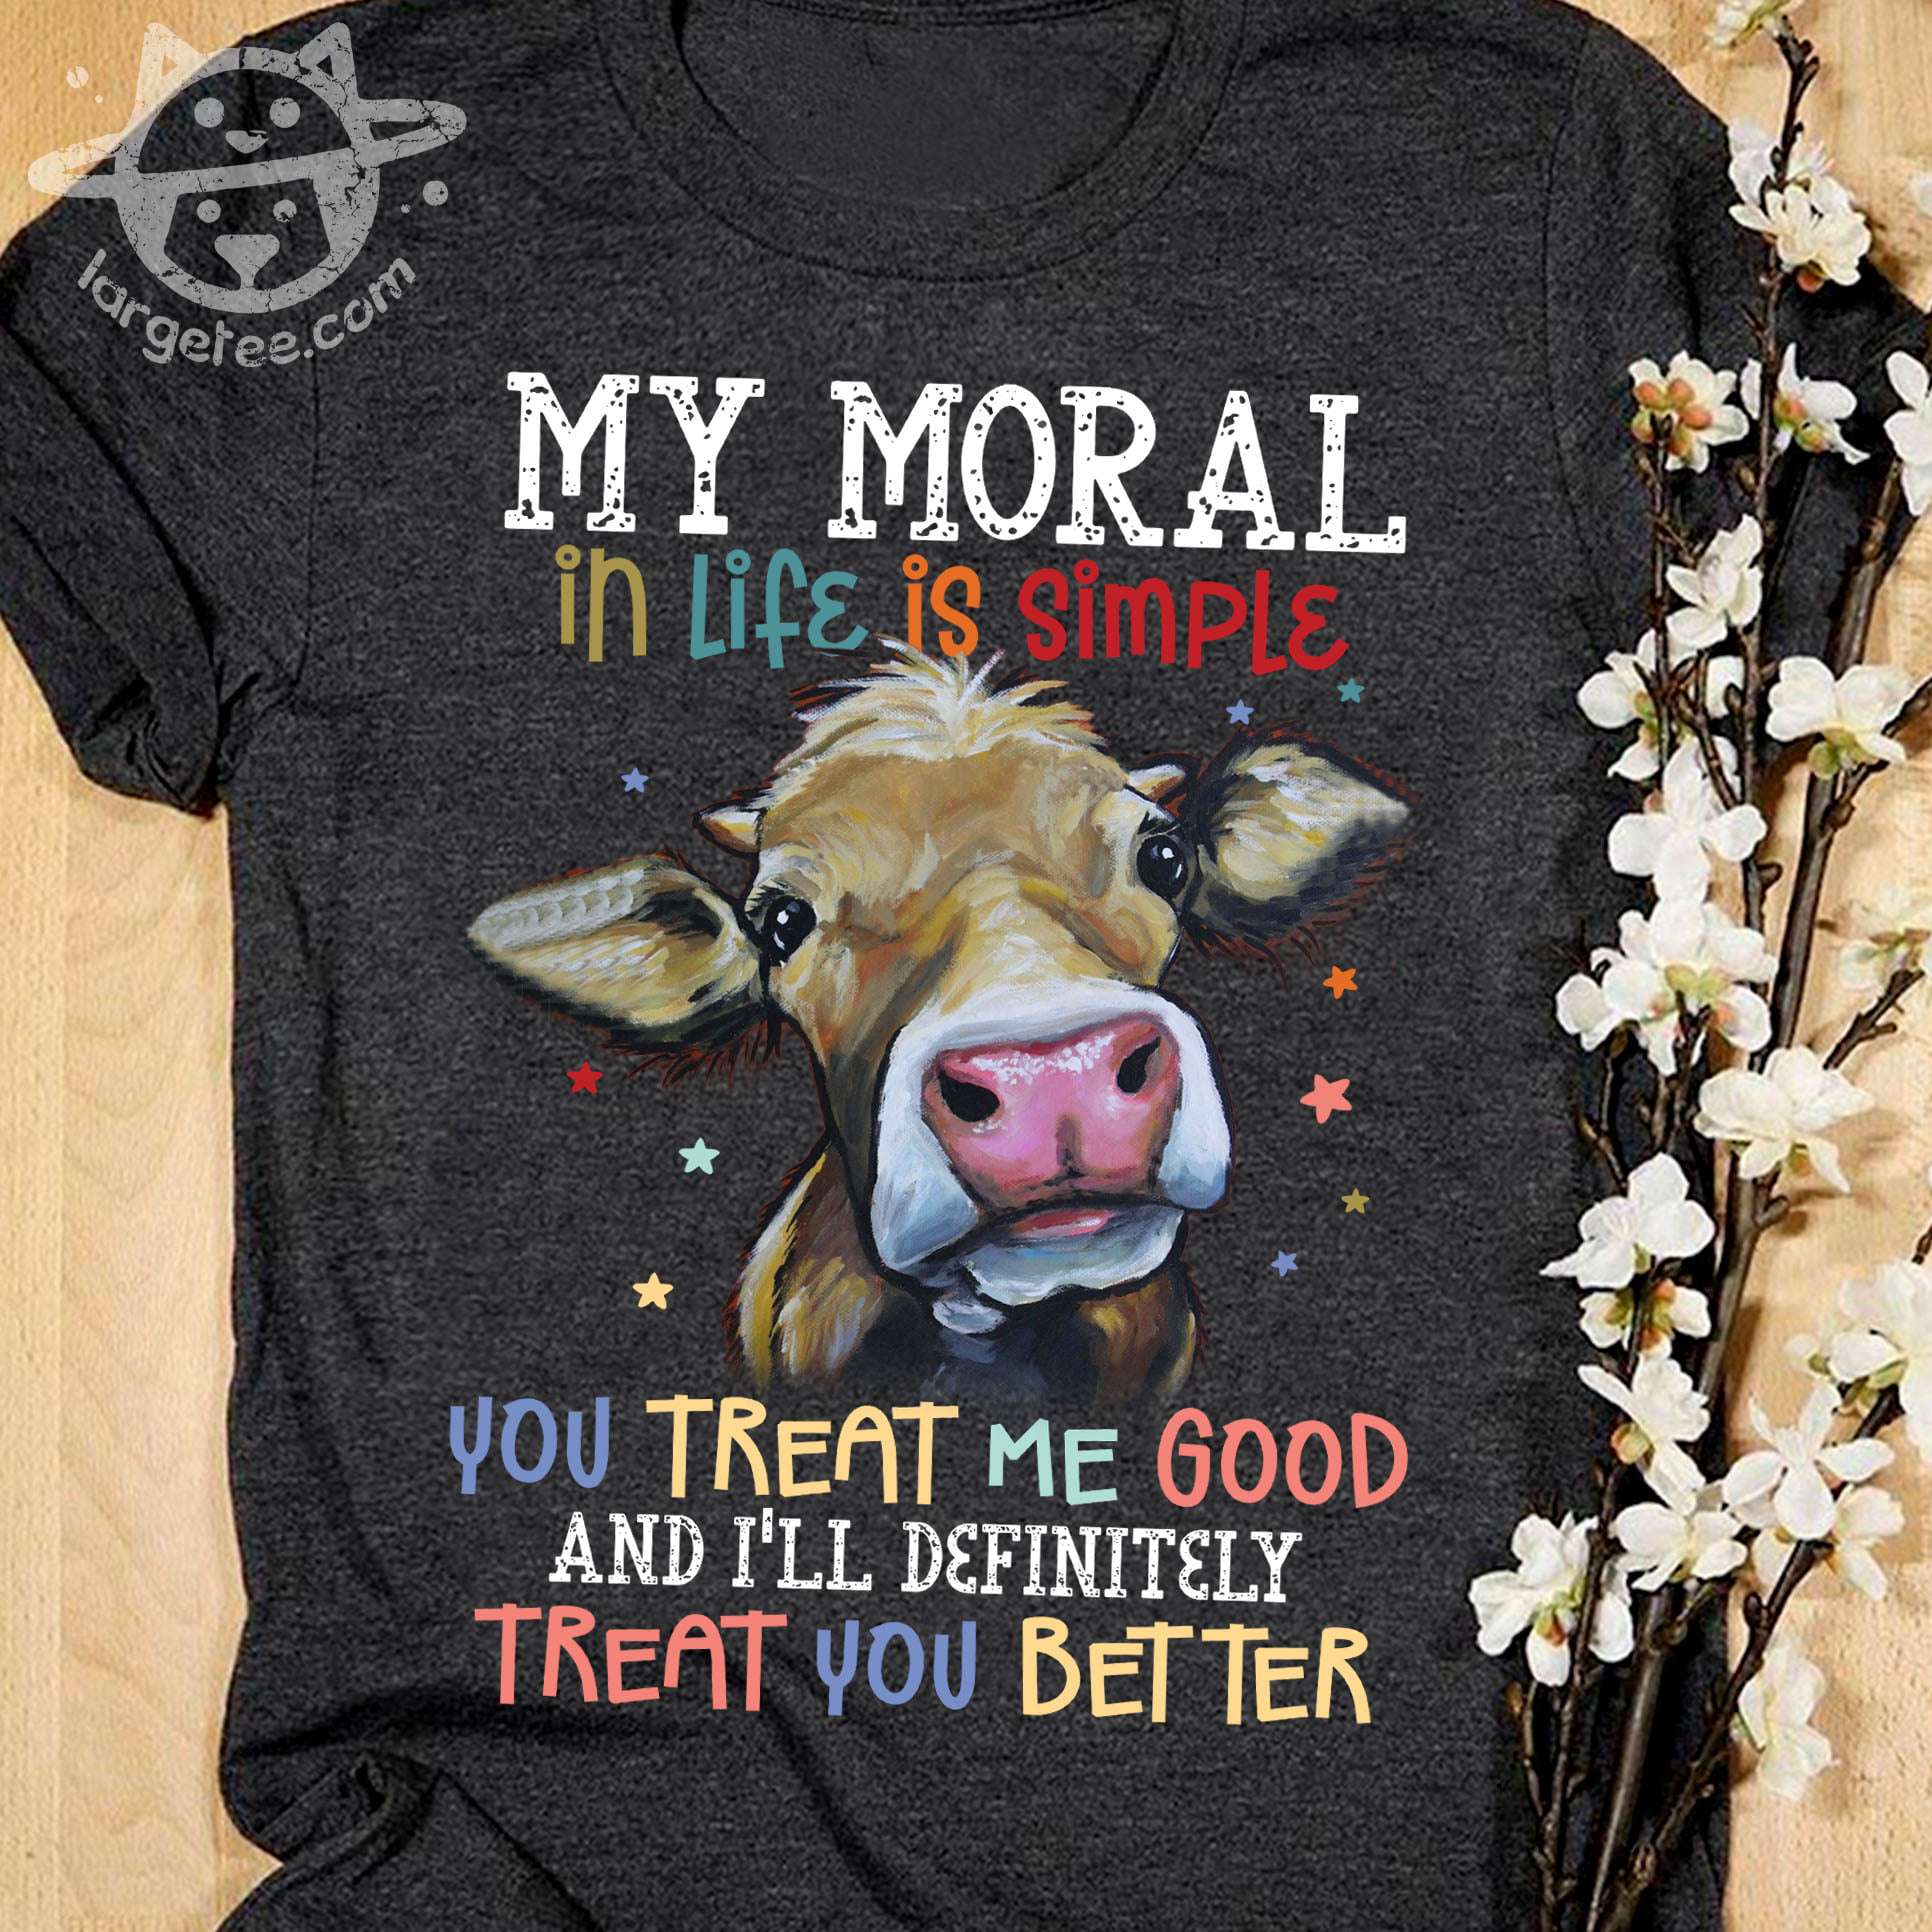 Funny Cow Graphic T-shirt - My moral in life is simple you treat me good and i'll definitely treat you better